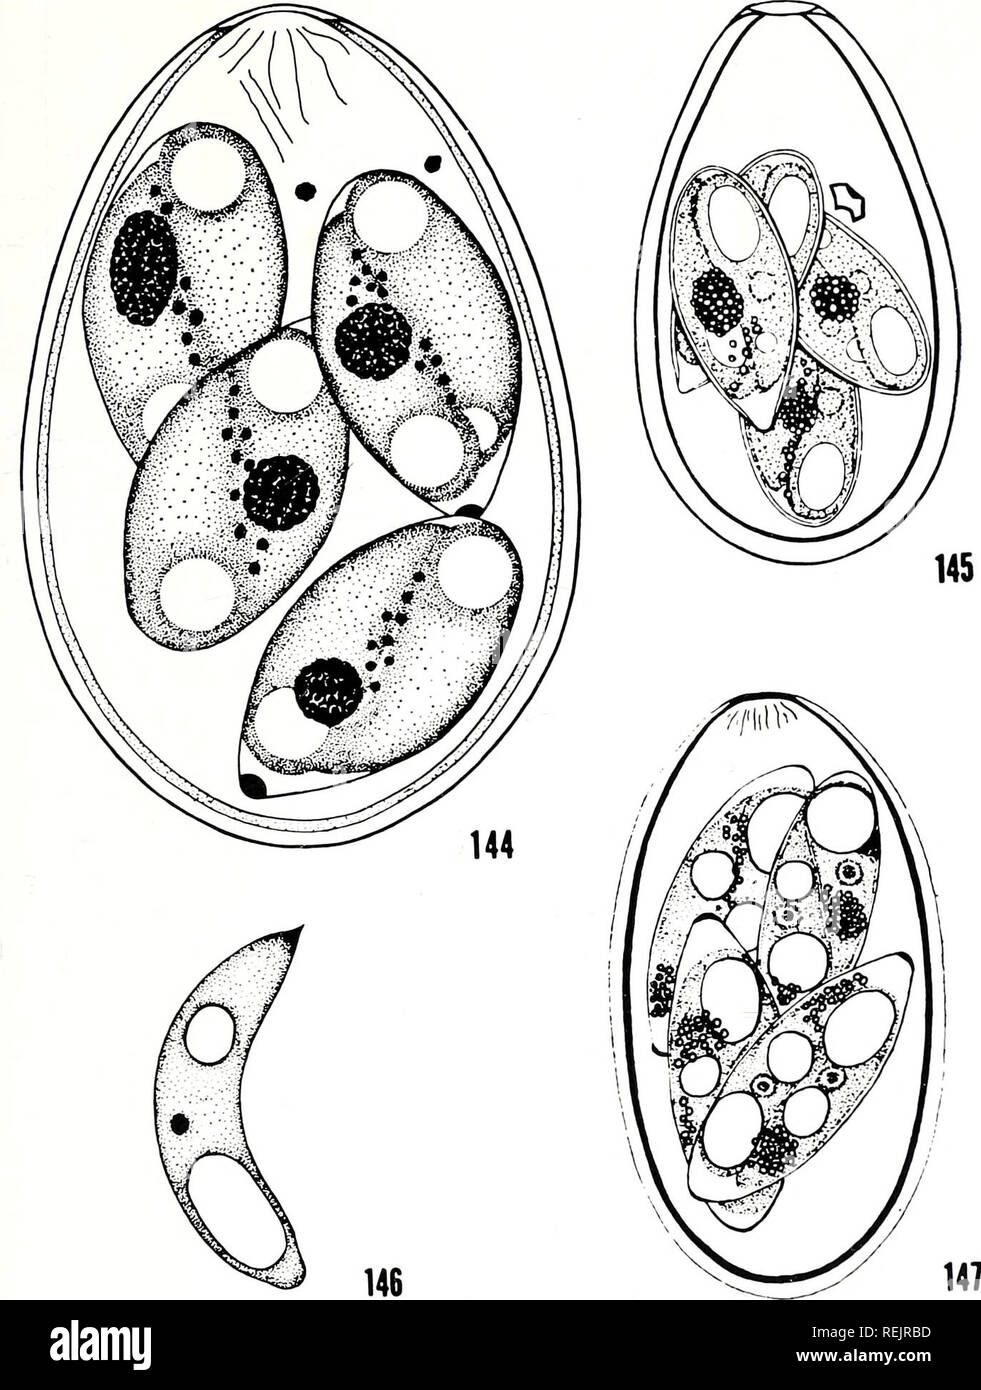 . The coccidian parasites (Protozoa, Sporozoa) of ruminants. Coccidia; Ruminants. 23:. Plate 33 Figs. 144-147. E. auburnensis Christensen and Porter, 1939. Fig. 144. Specu- lated oocyst from Bos taunts (from Nyberg and Hammond, 1965). X 2500. Fig. 145. Sporulated oocyst from Bos taurus (from Joyncr et al., 19G6). X 1620. Fig. 146. Sporozoite (from Nyberg and Hammond, 1965). X 2500. Fig. 147. Sporulated oocyst from Bubalus bubalis (from Bhatia et al., 1968). X 1500.. Please note that these images are extracted from scanned page images that may have been digitally enhanced for readability - colo Stock Photo